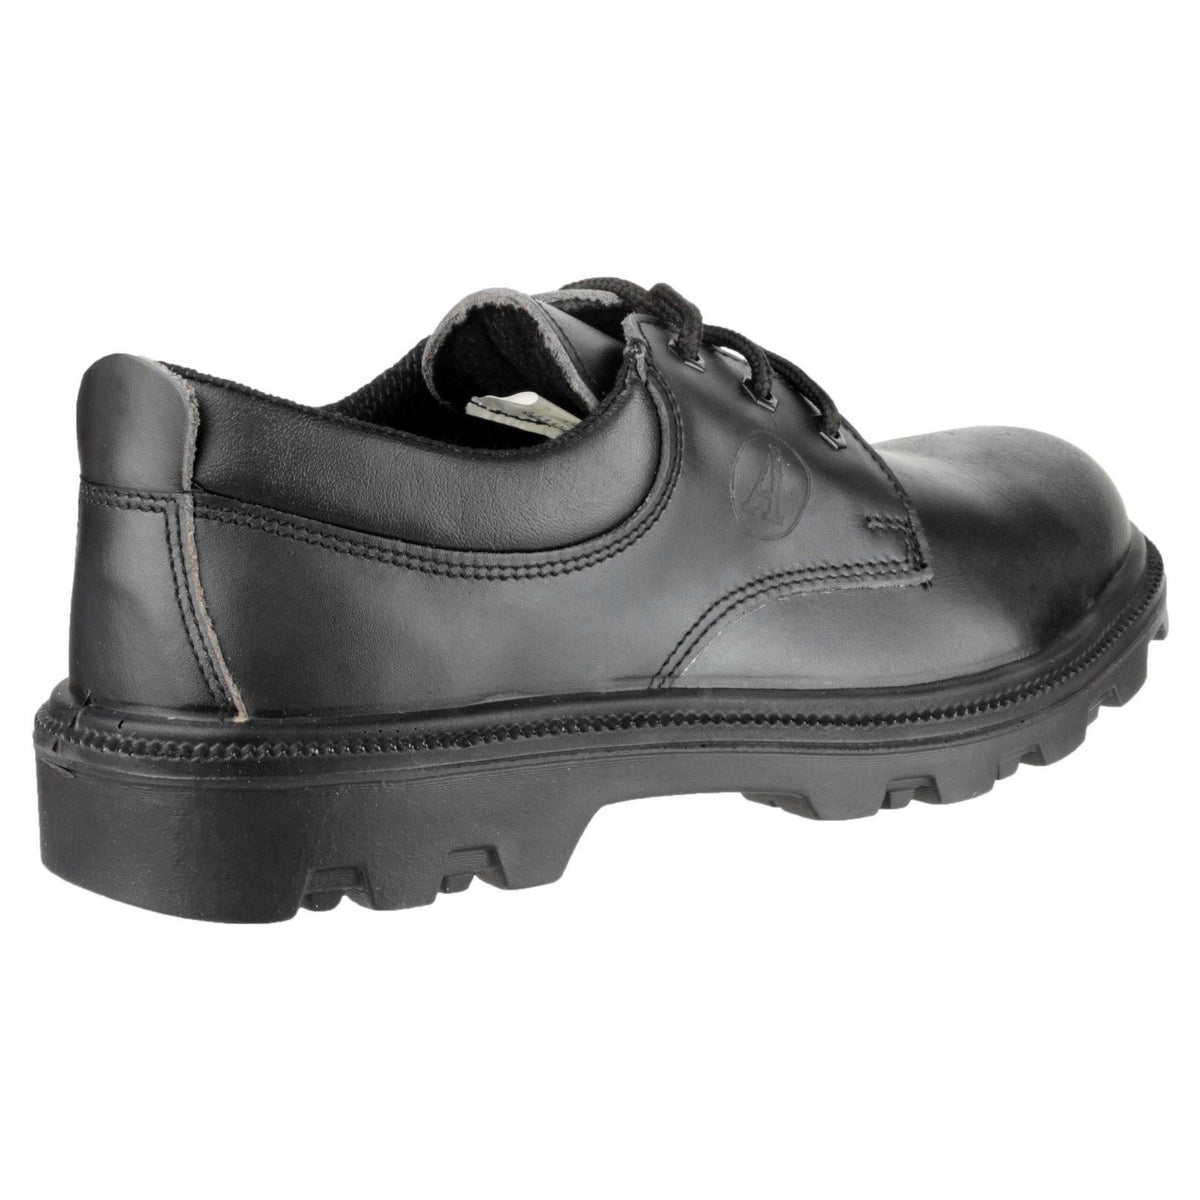 Amblers Safety FS133 Lace up Safety Shoes